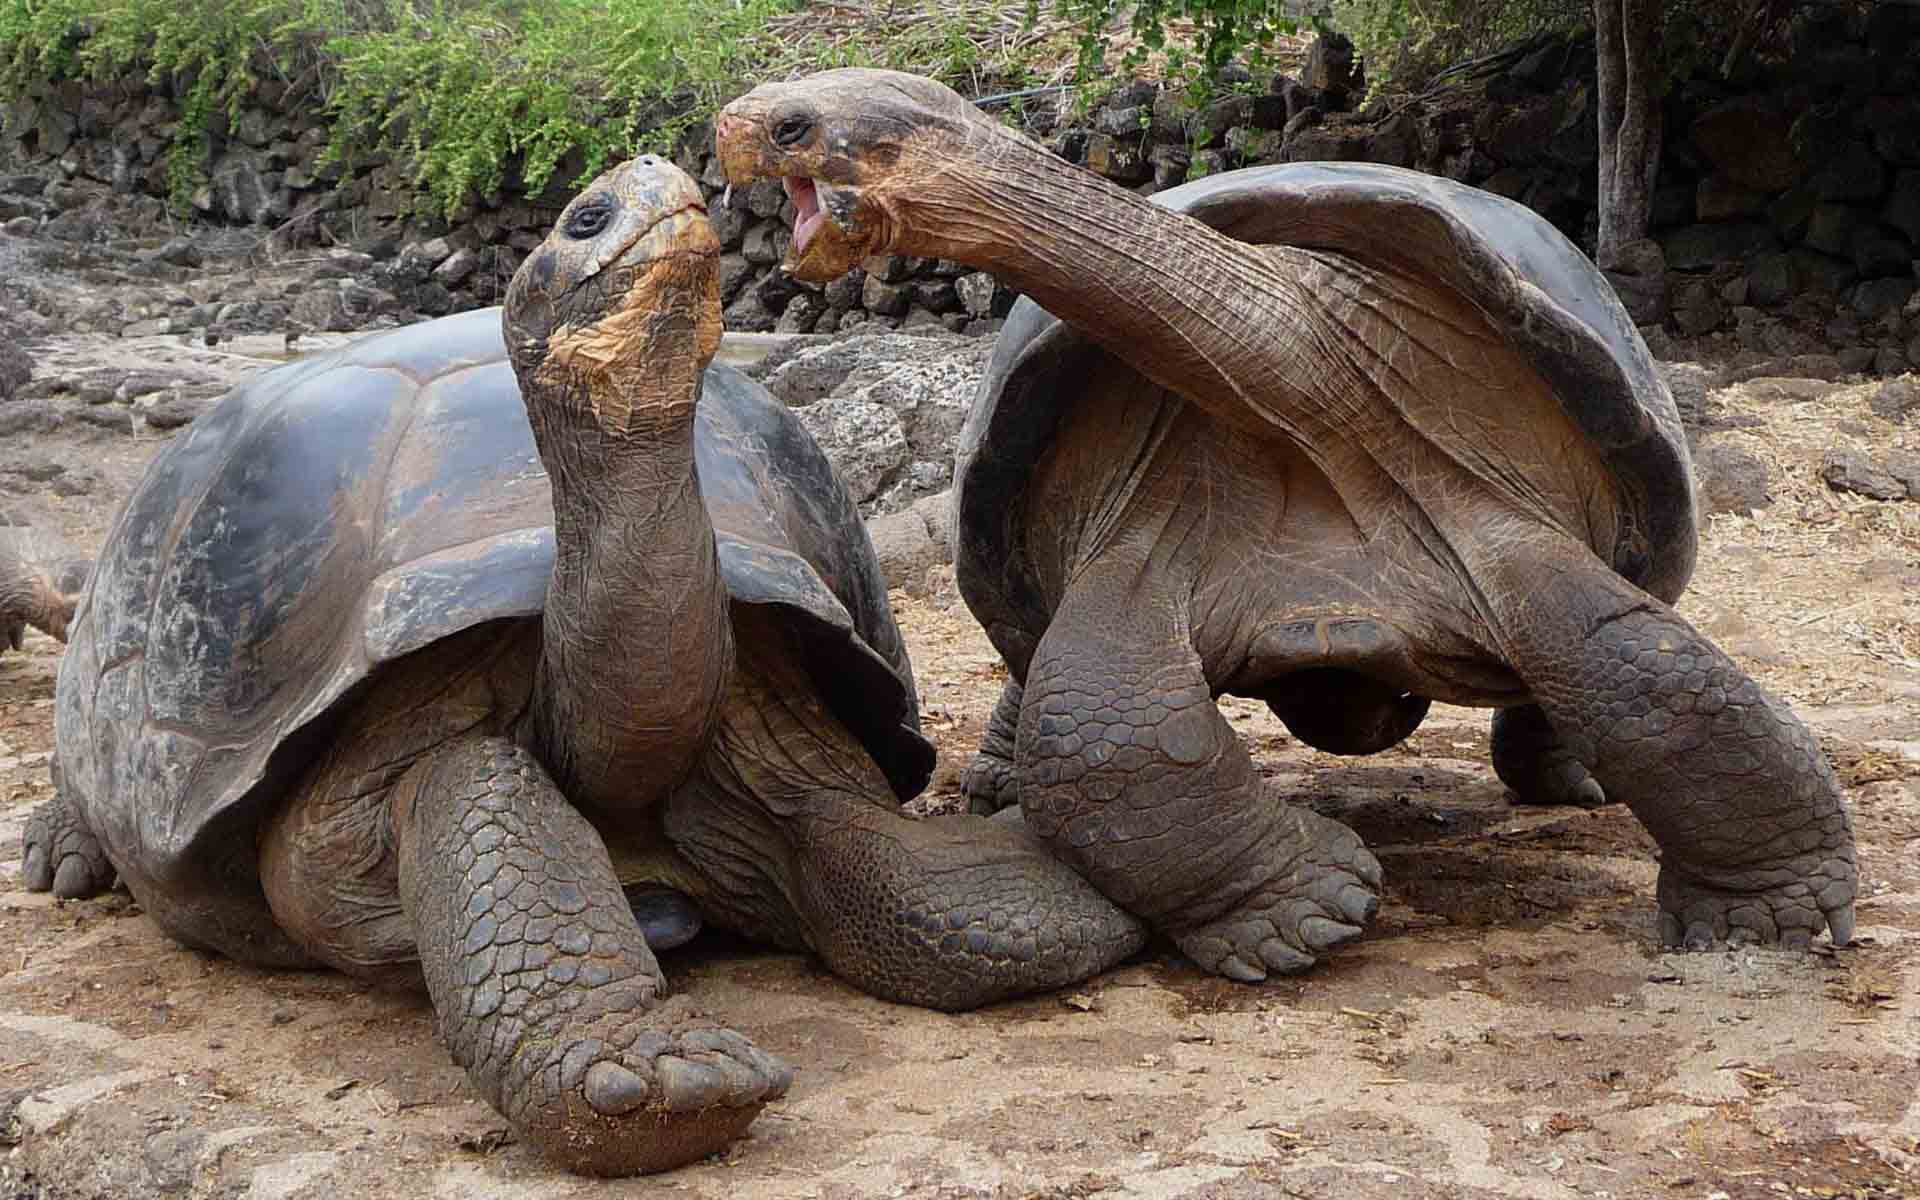 Galápagos tortoise. Places I'd Like to Go. Galapagos